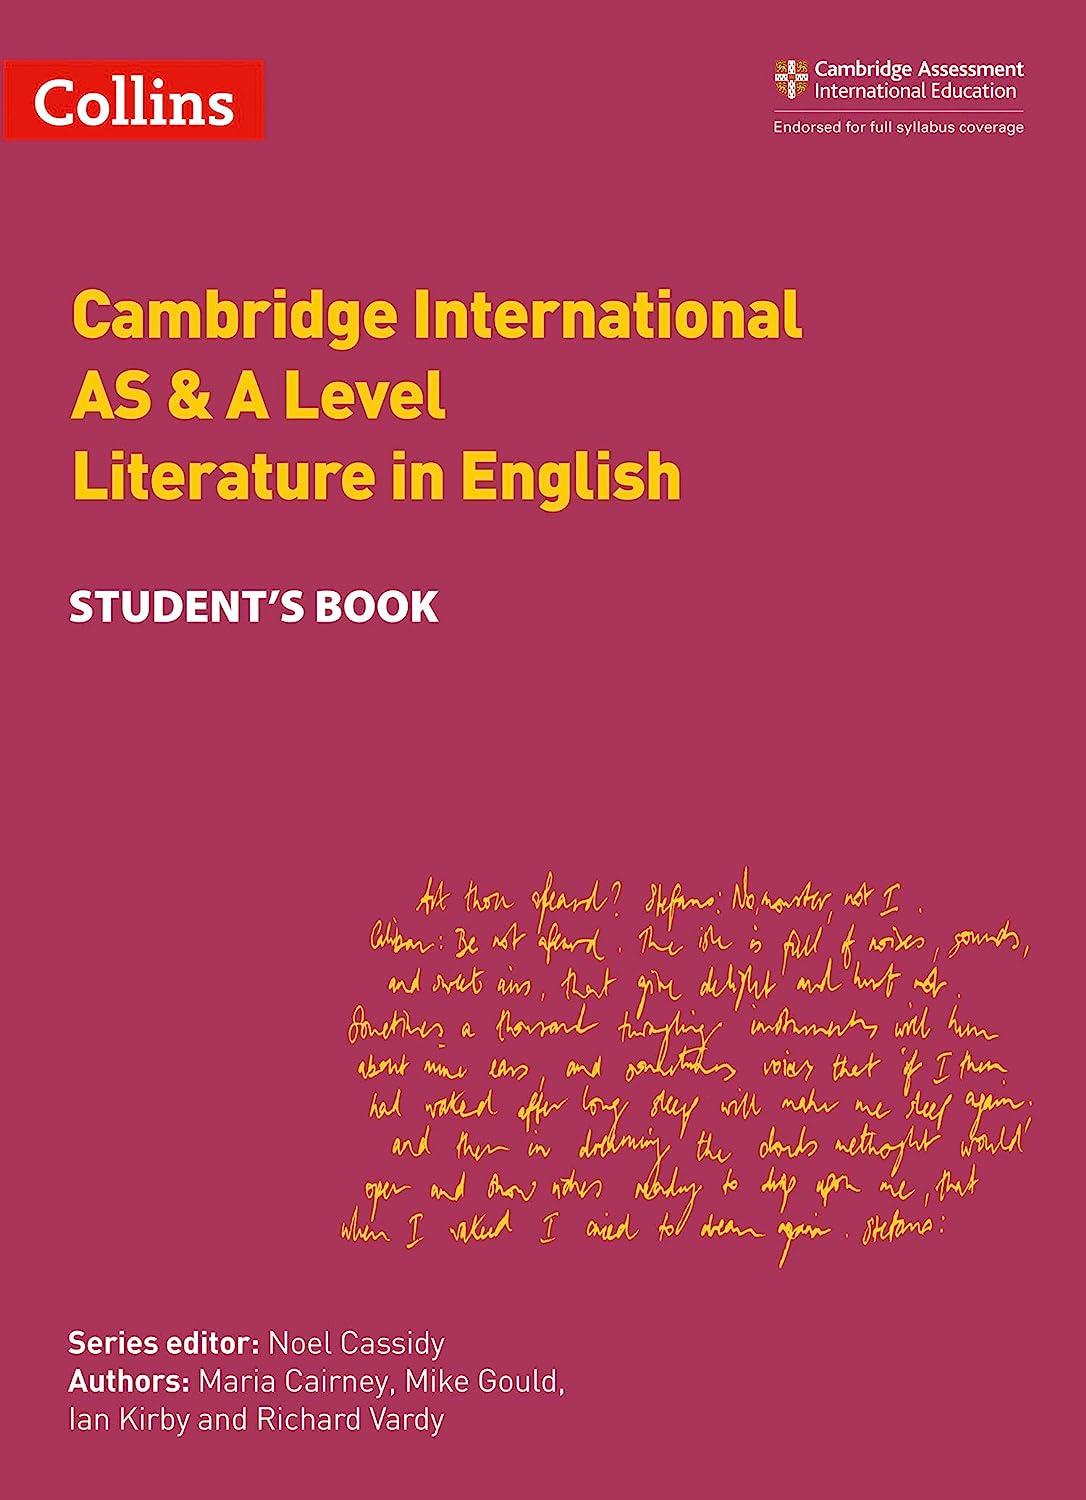 cambridge international as and a level literature in english student book 1st edition maria cairney, mike